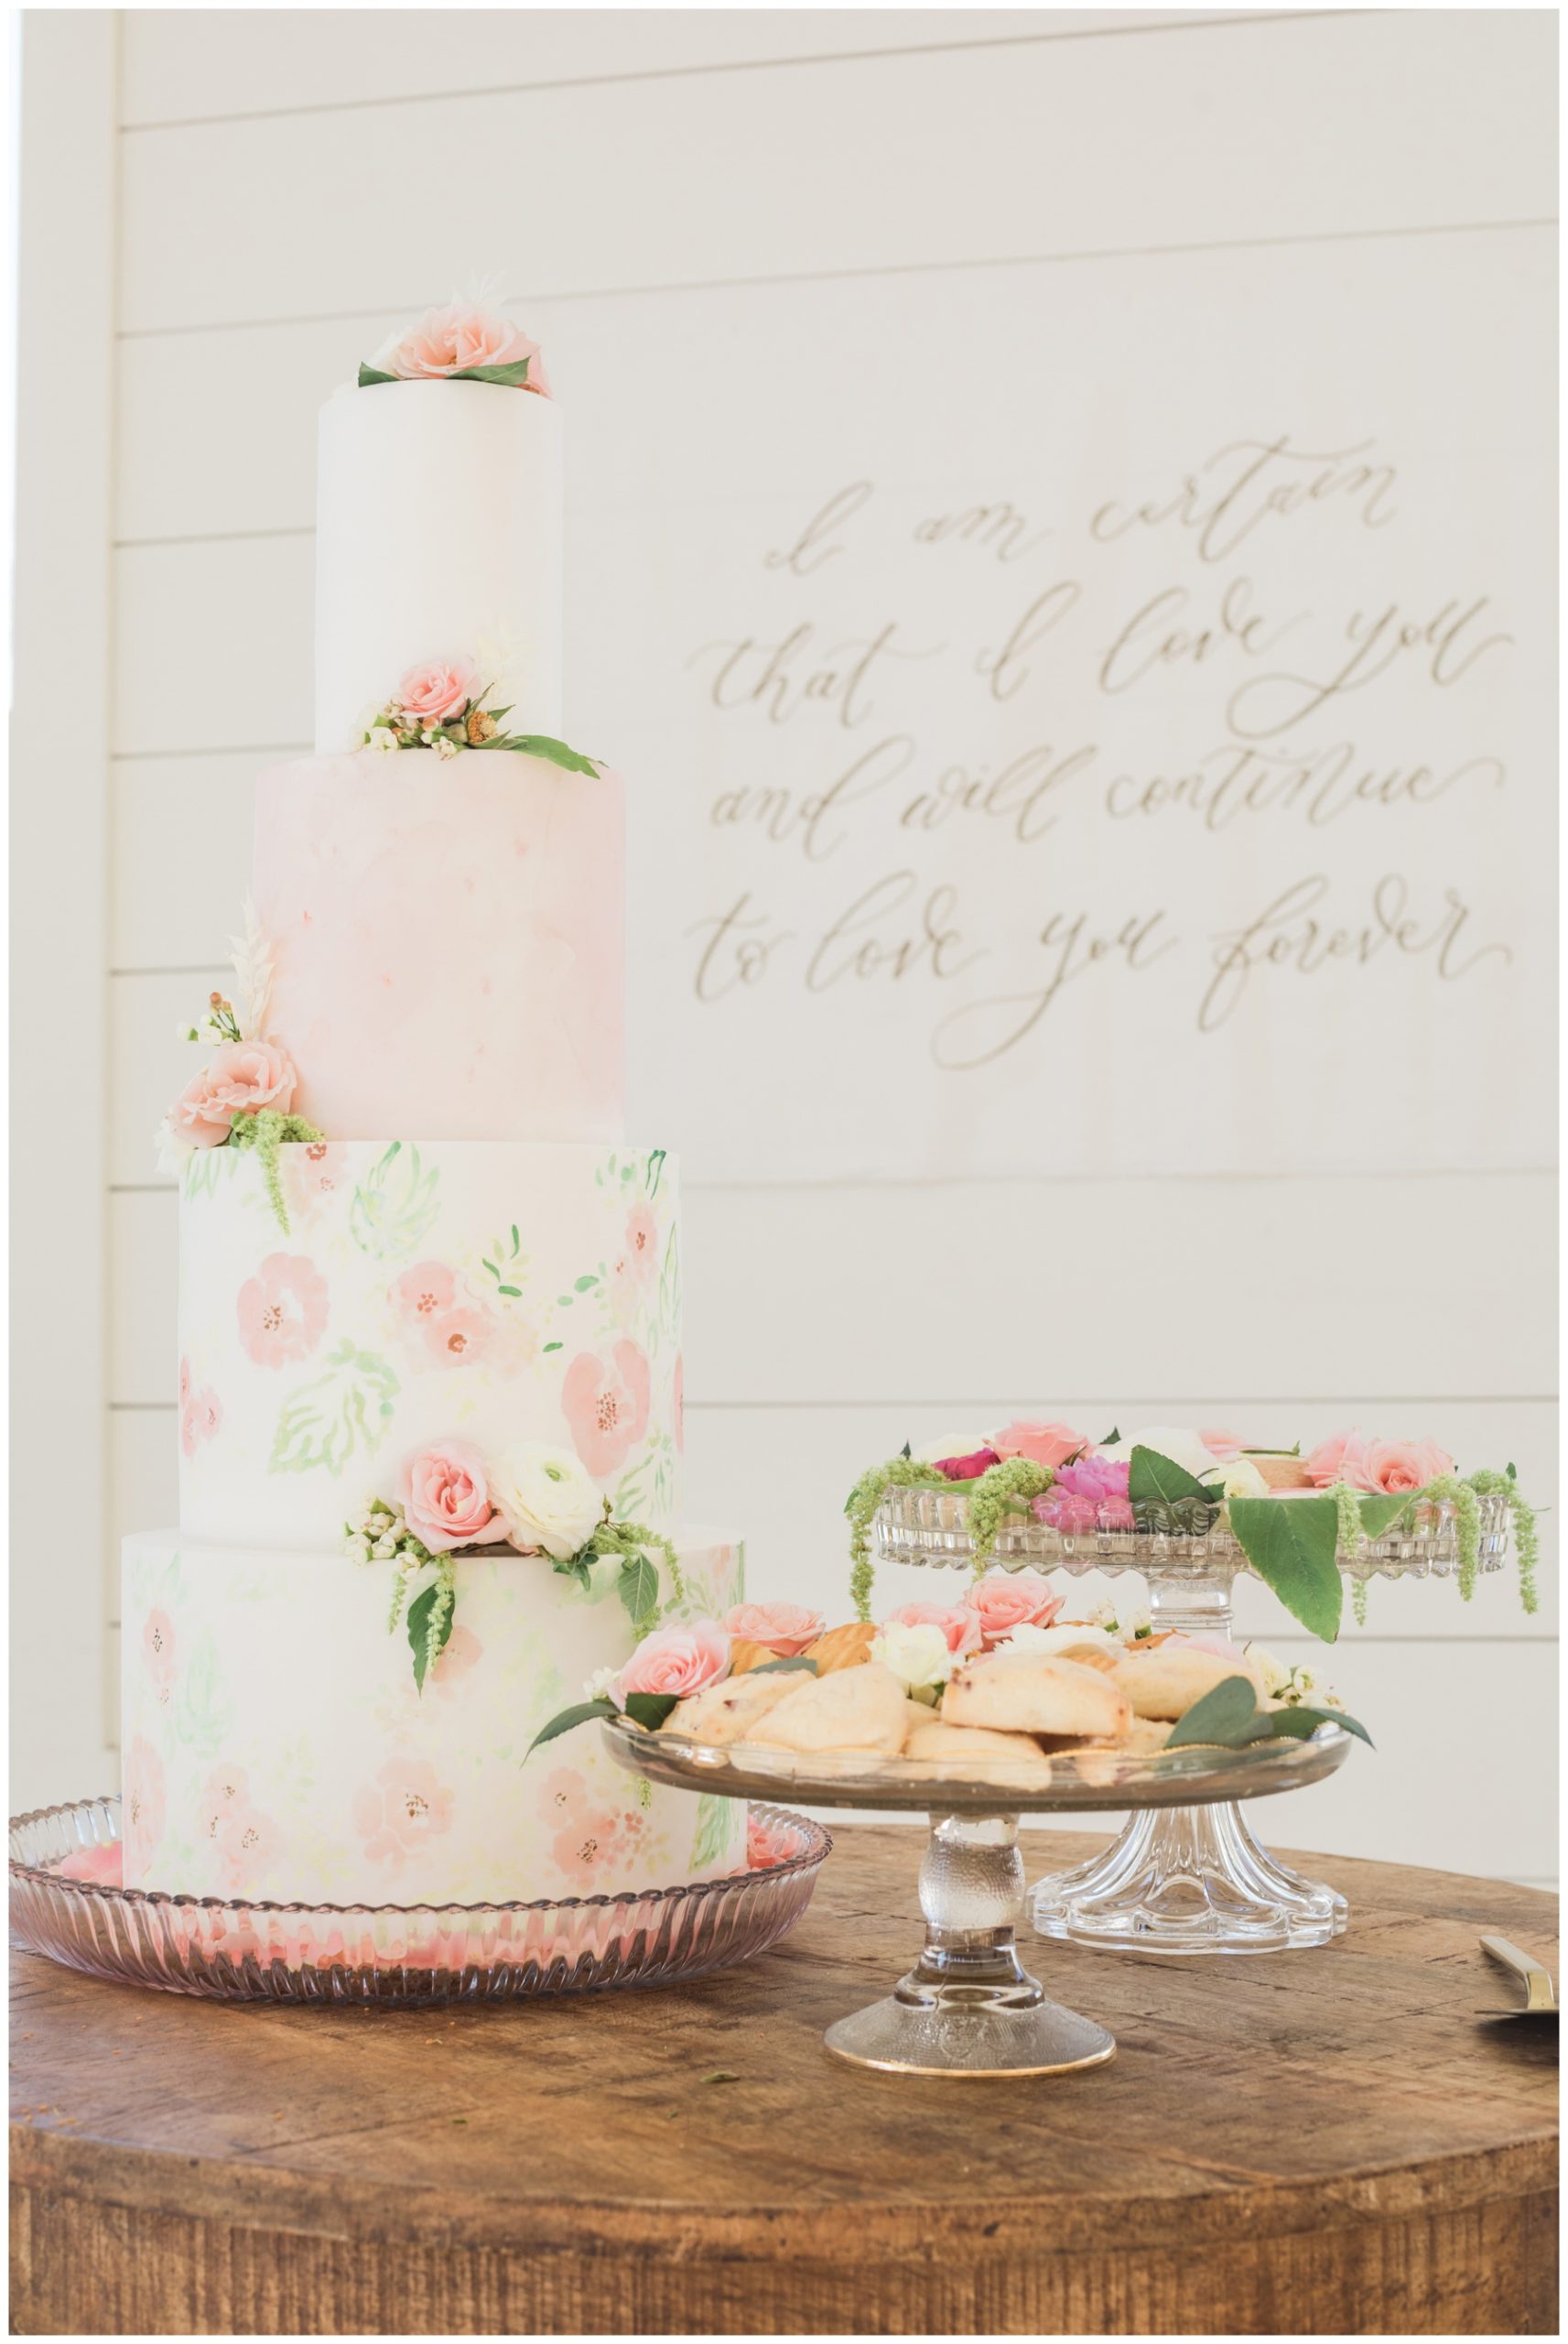 Hand painted floral wedding cake by Sinfully Sweet